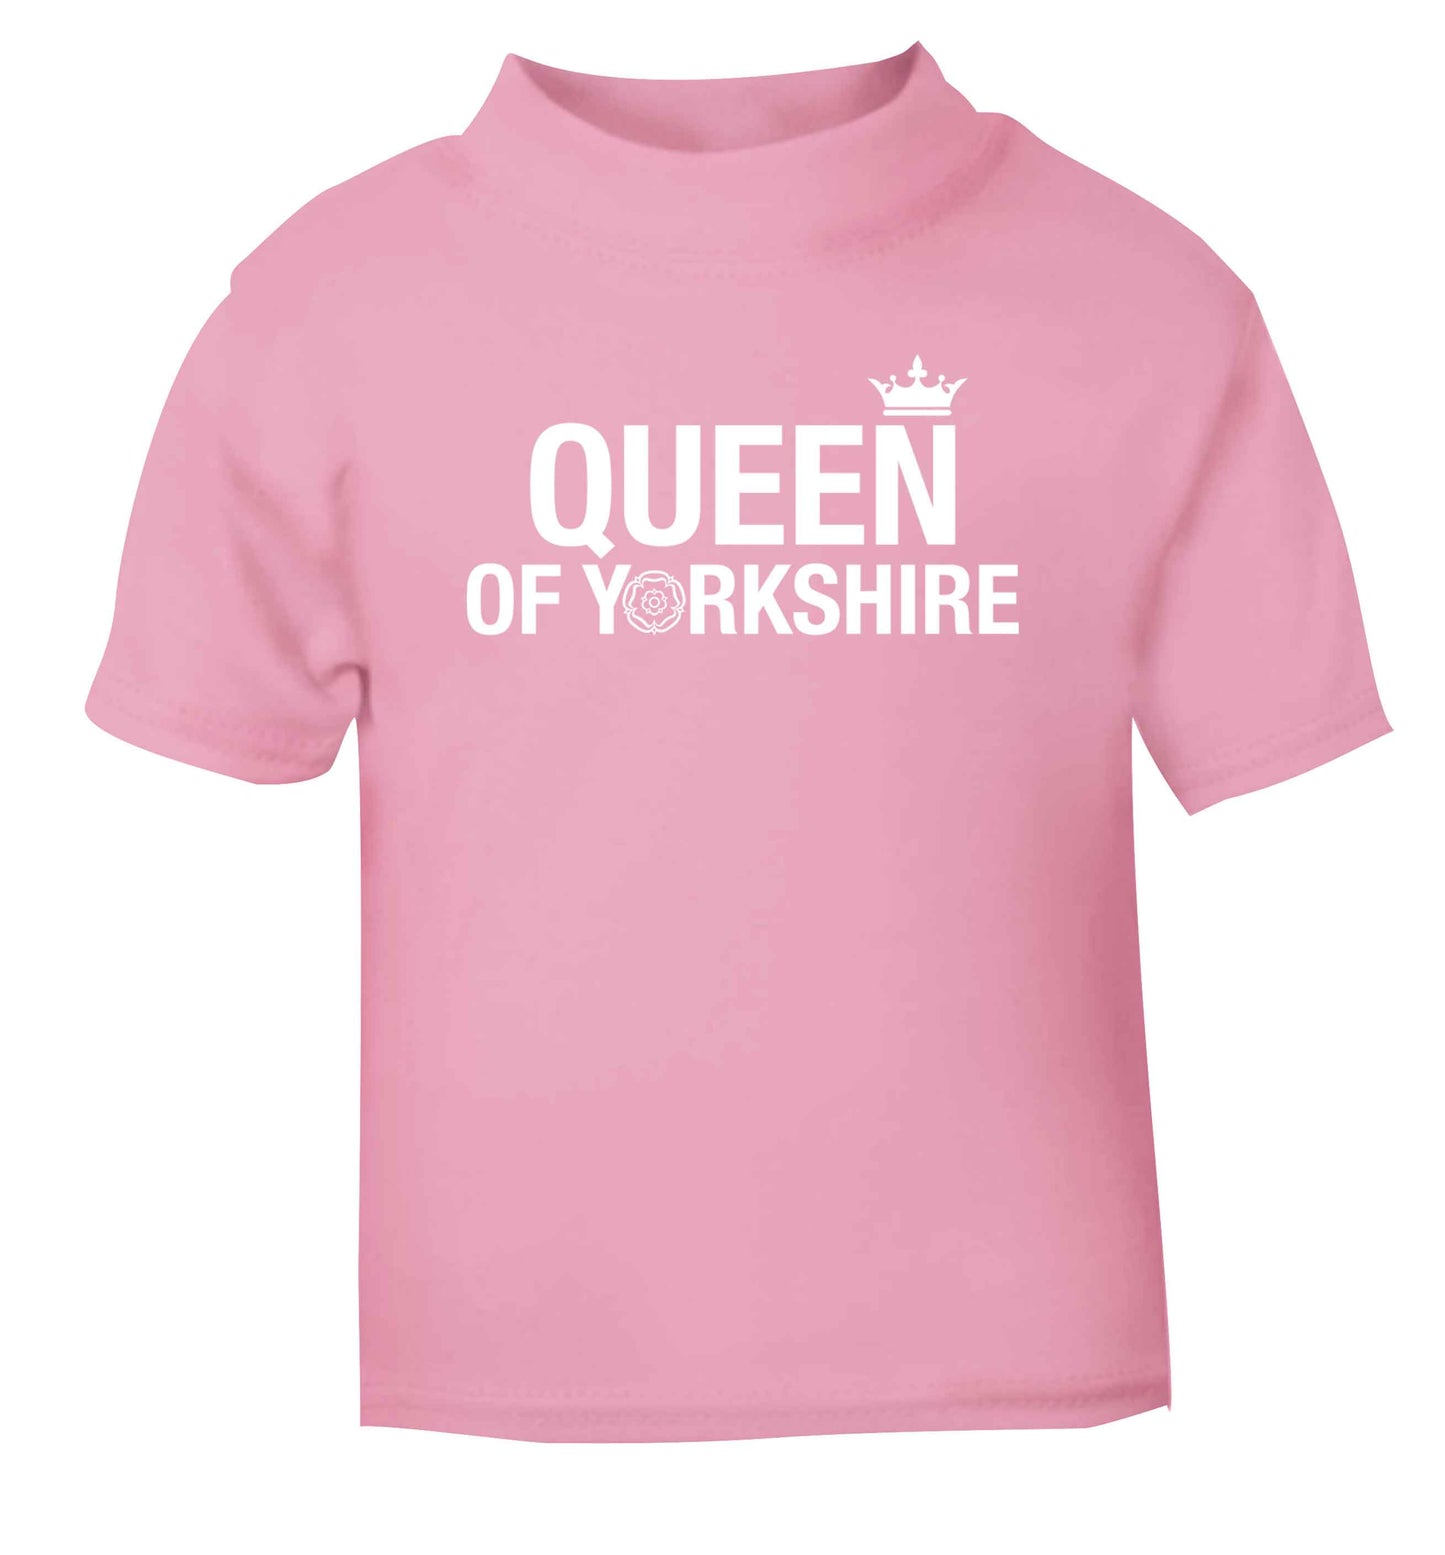 Queen of Yorkshire light pink Baby Toddler Tshirt 2 Years